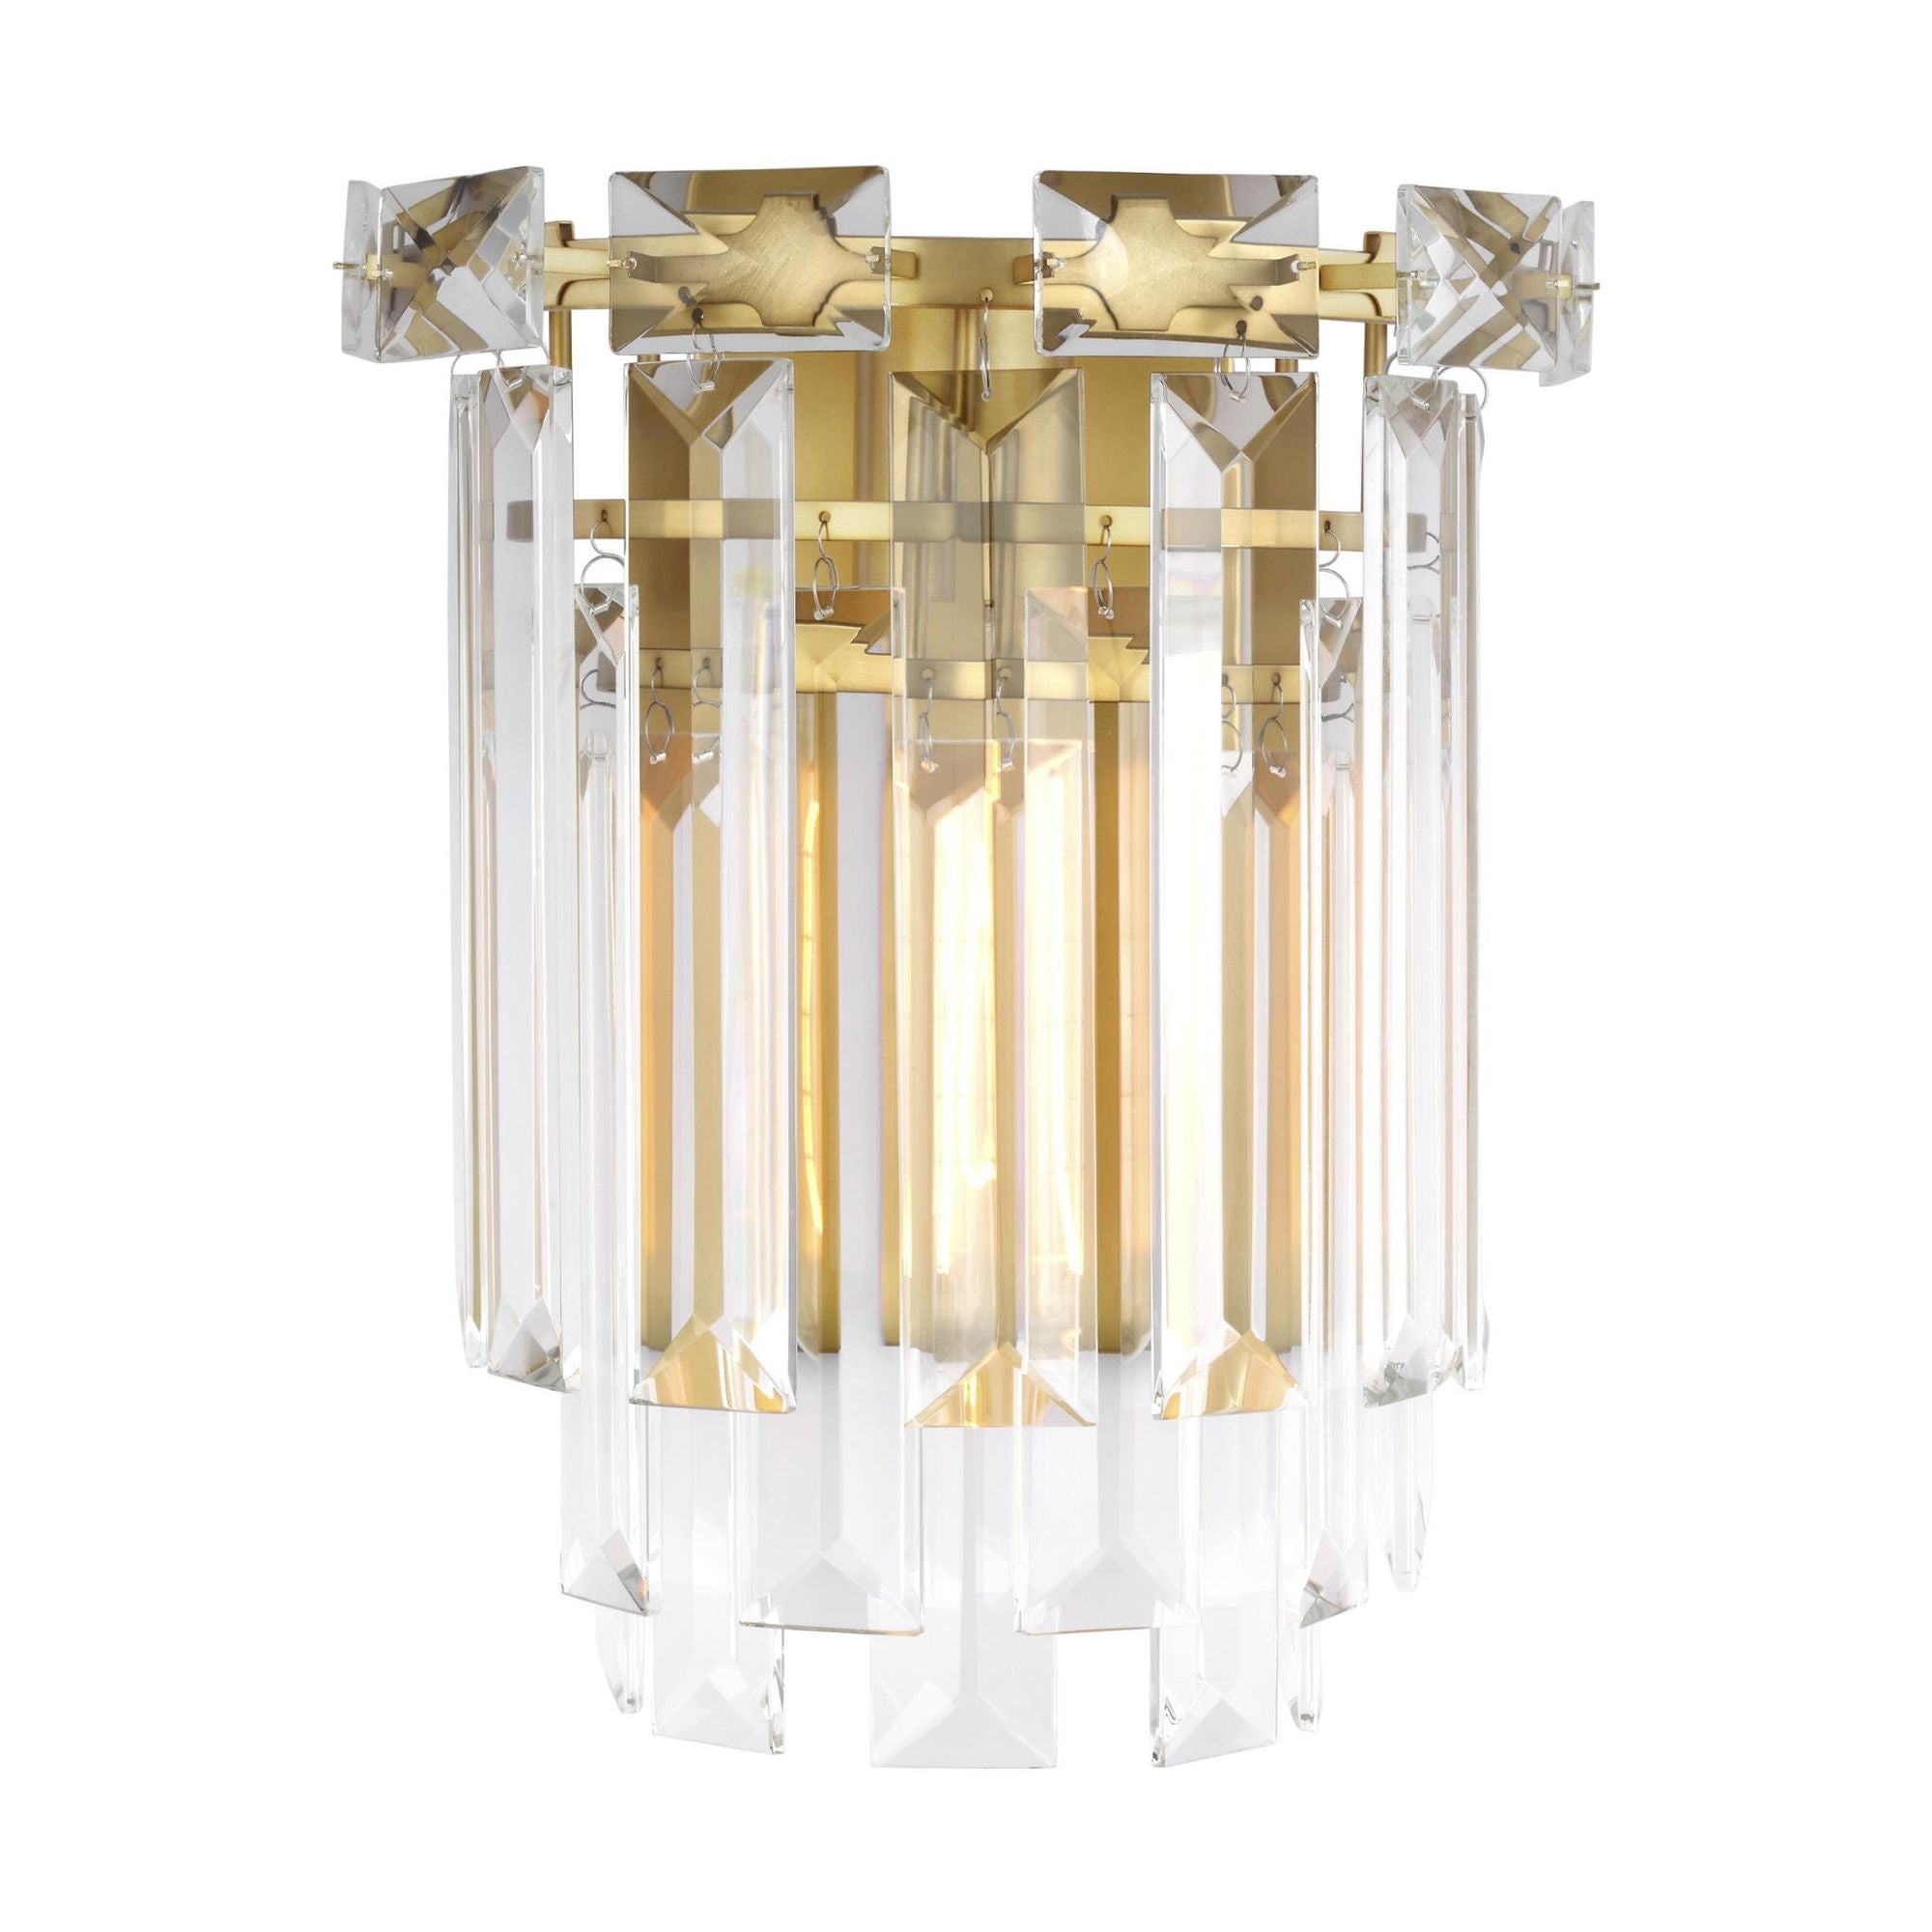 Chapman & Myers Arden Sconce in Burnished Brass